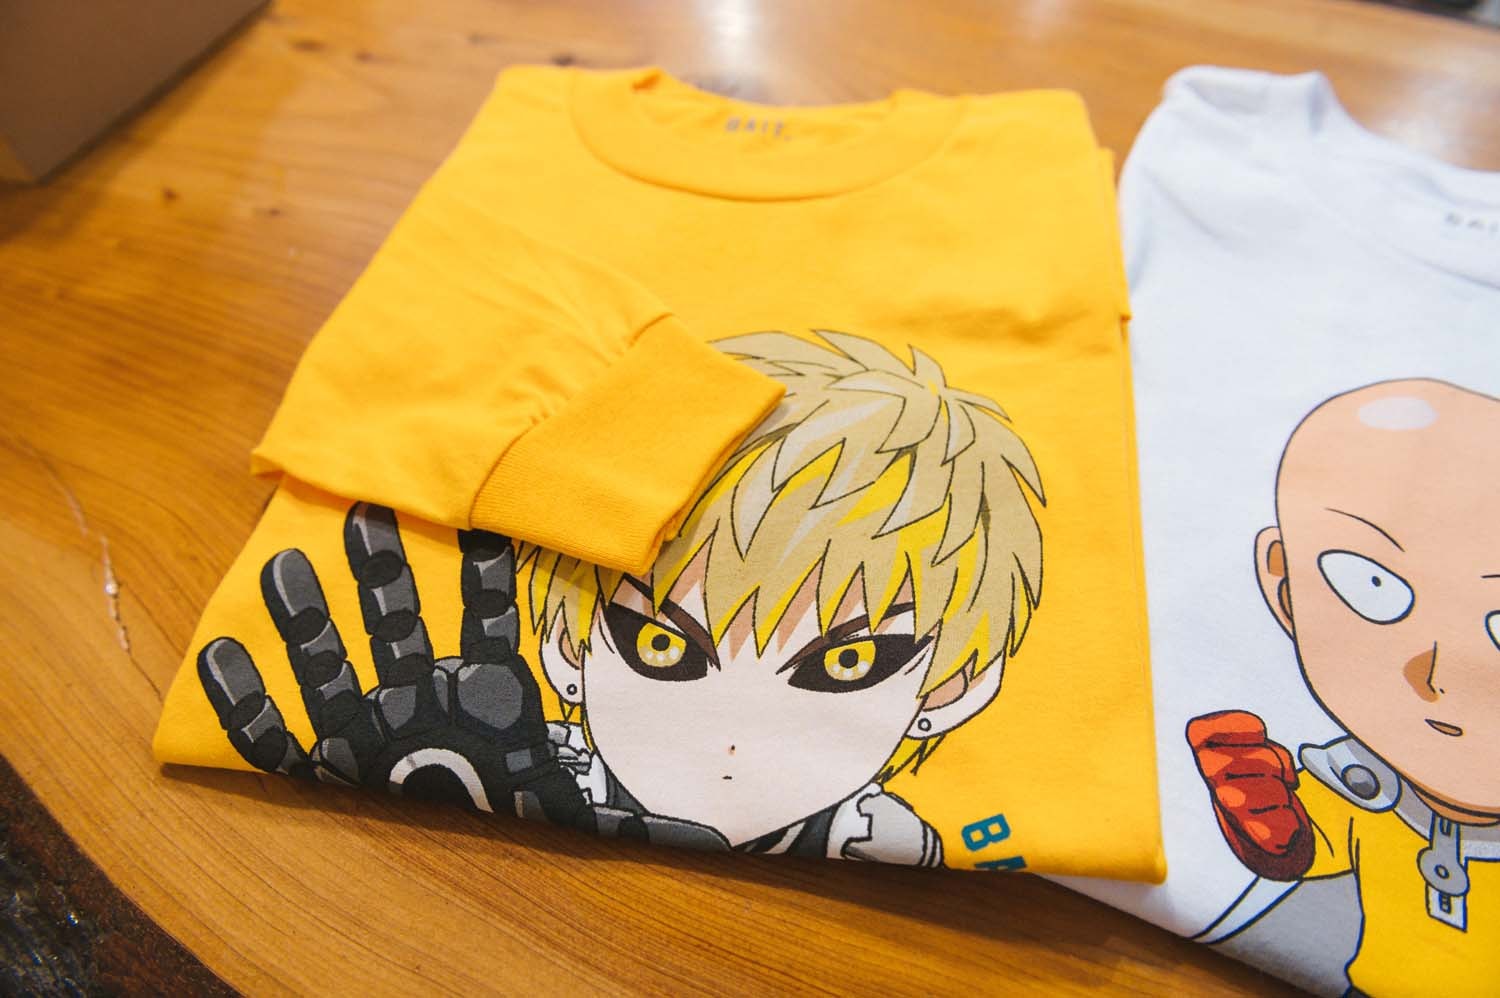 BAIT x One Punch Man Delivery 2 Lookbook